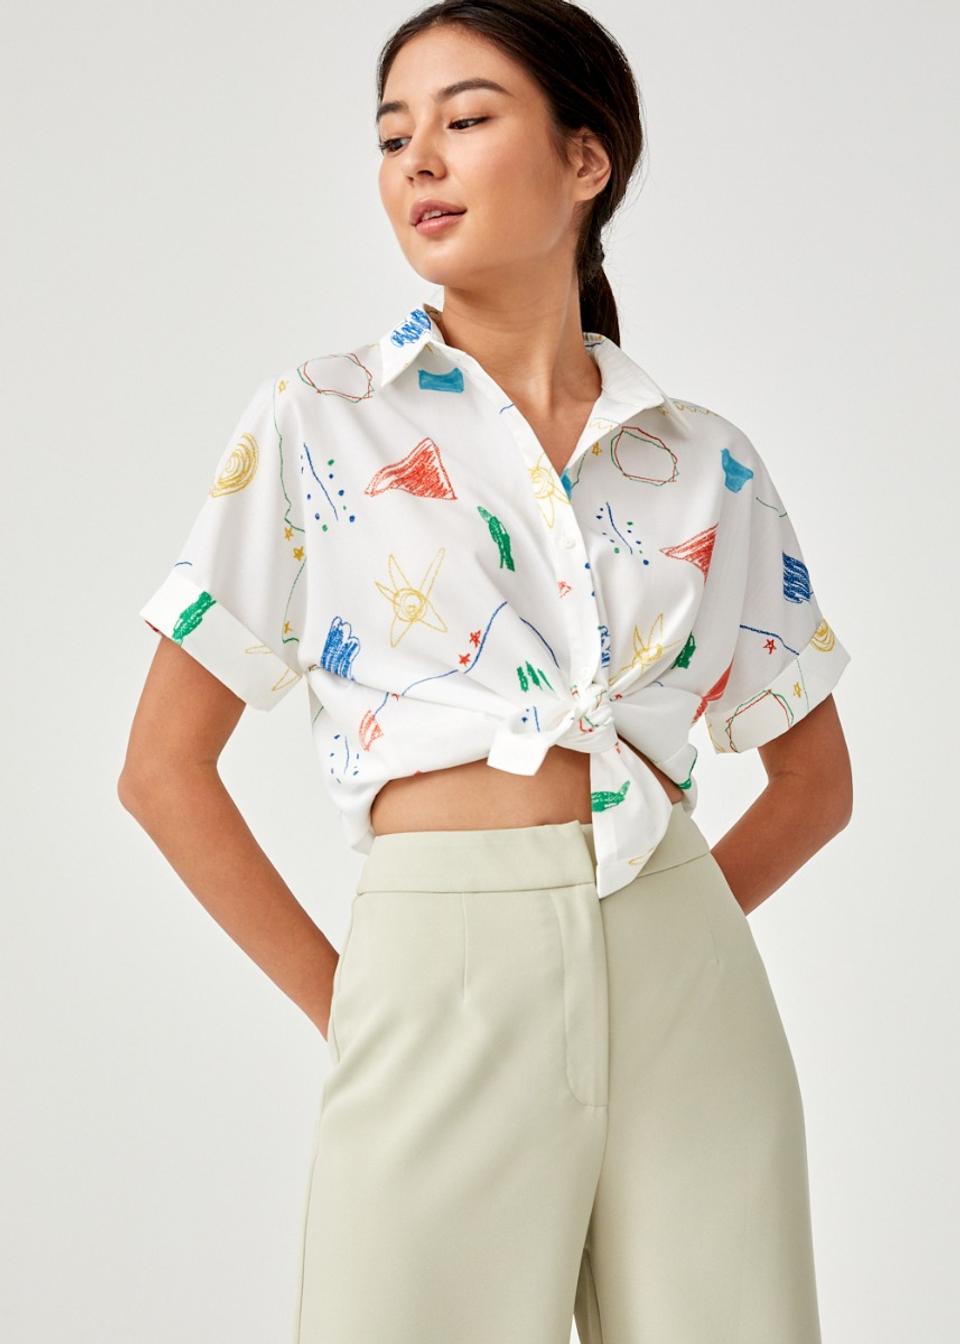 Baylin Relaxed Cuffed Shirt in Sunny Scribbles